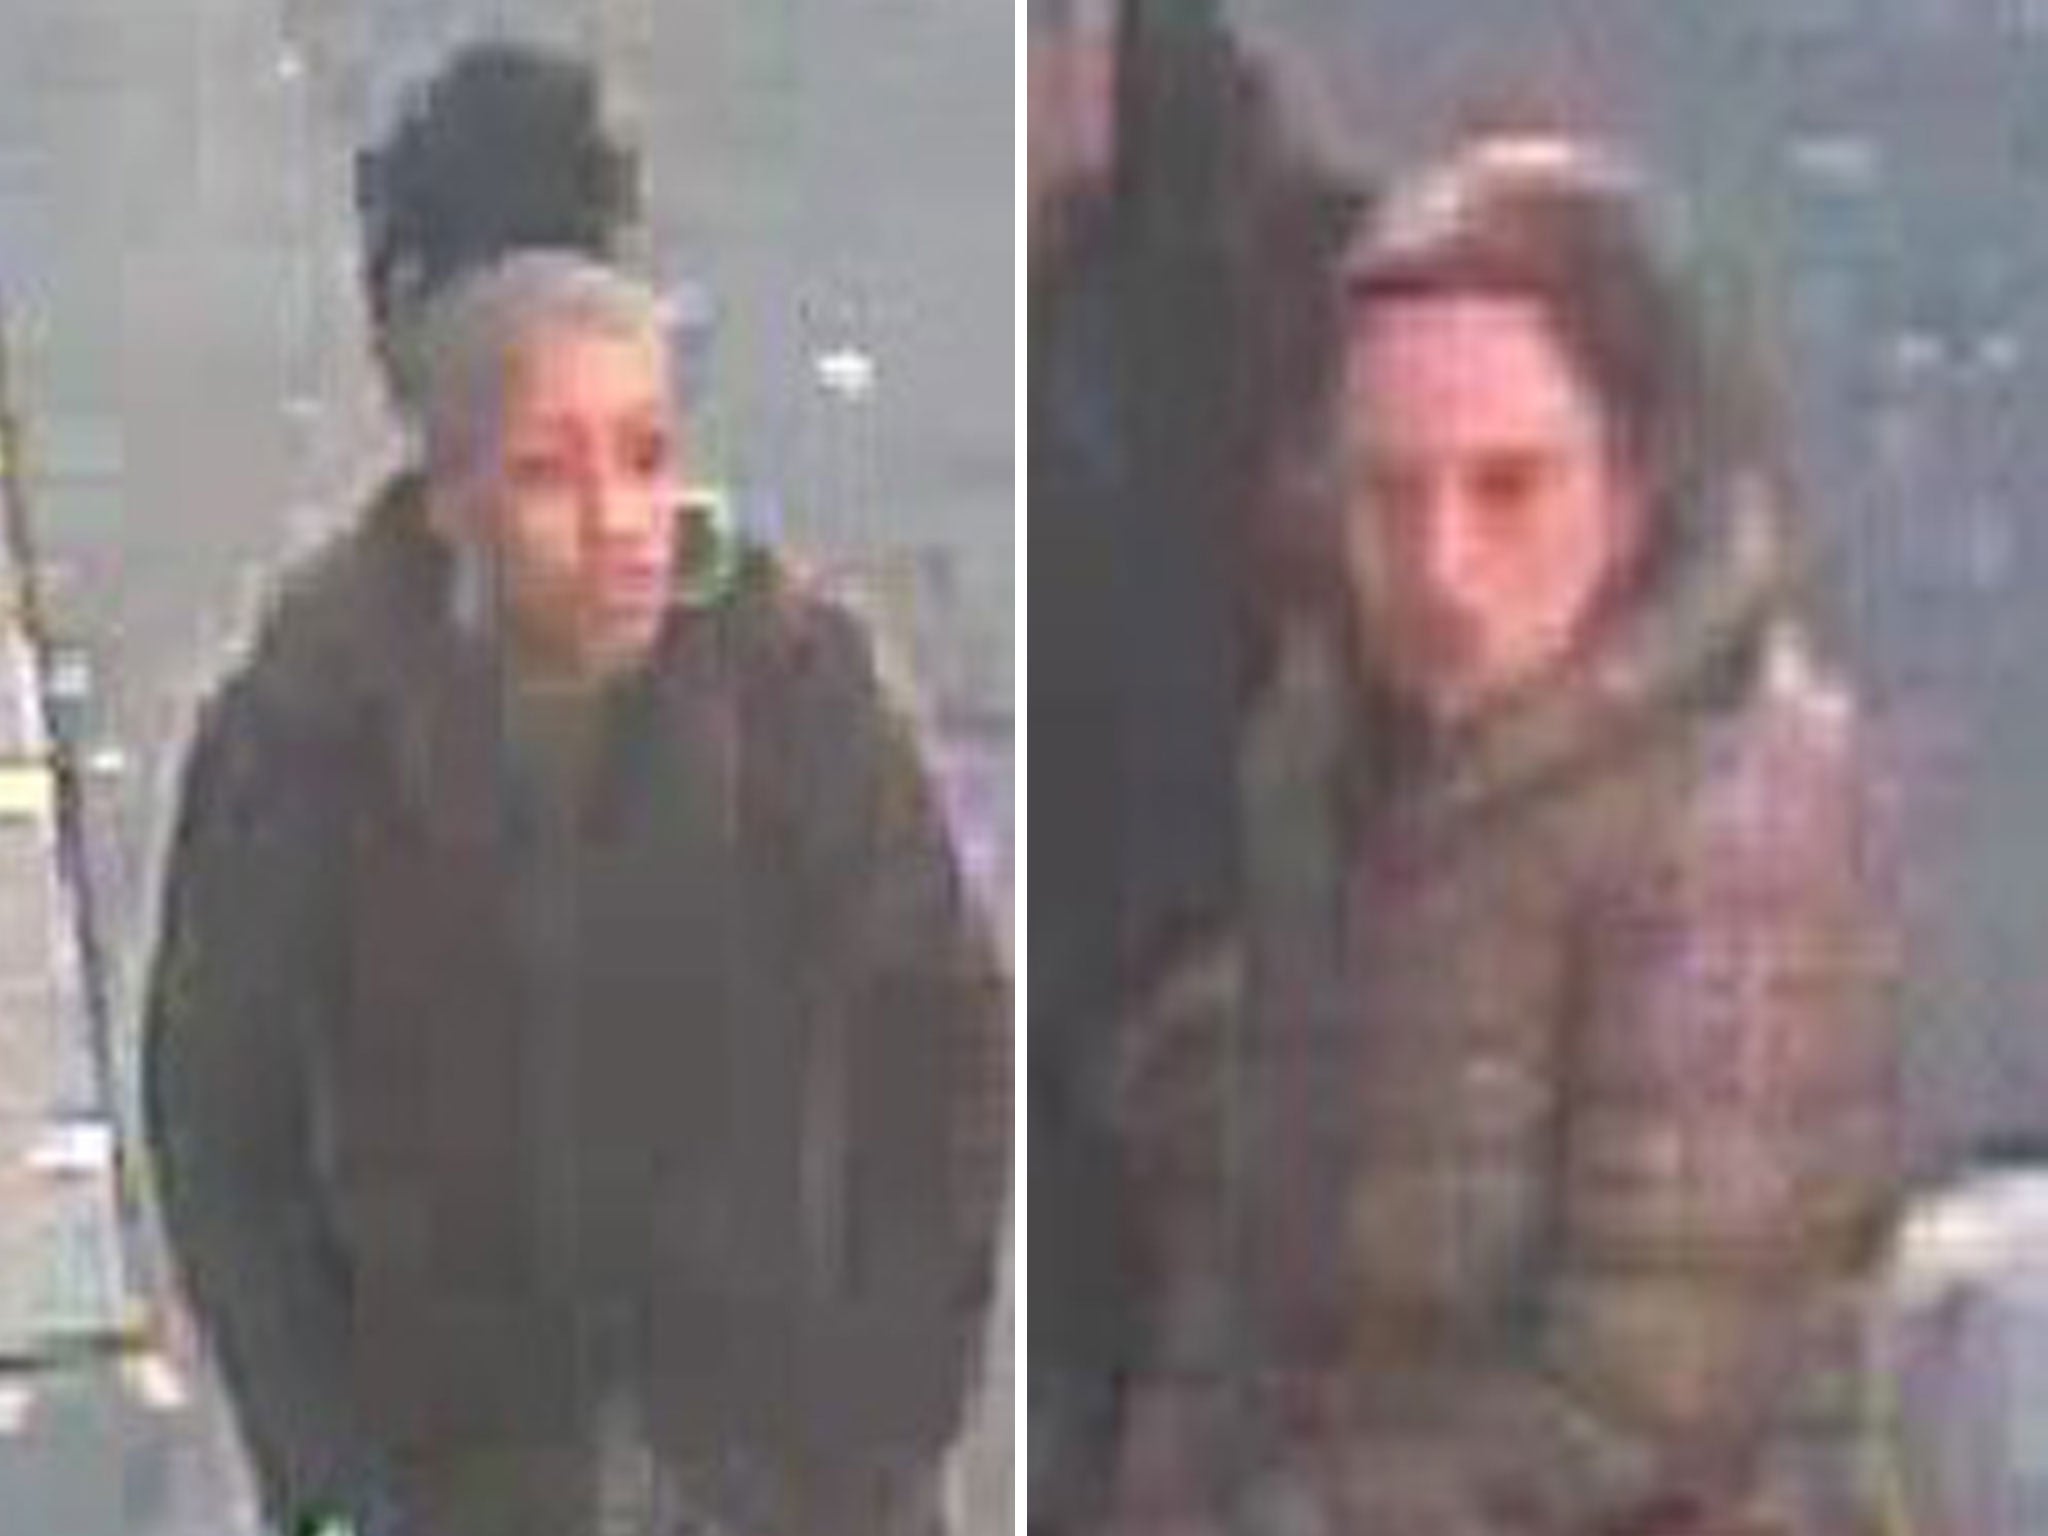 Police are looking to speak with these two women in connection with the incident